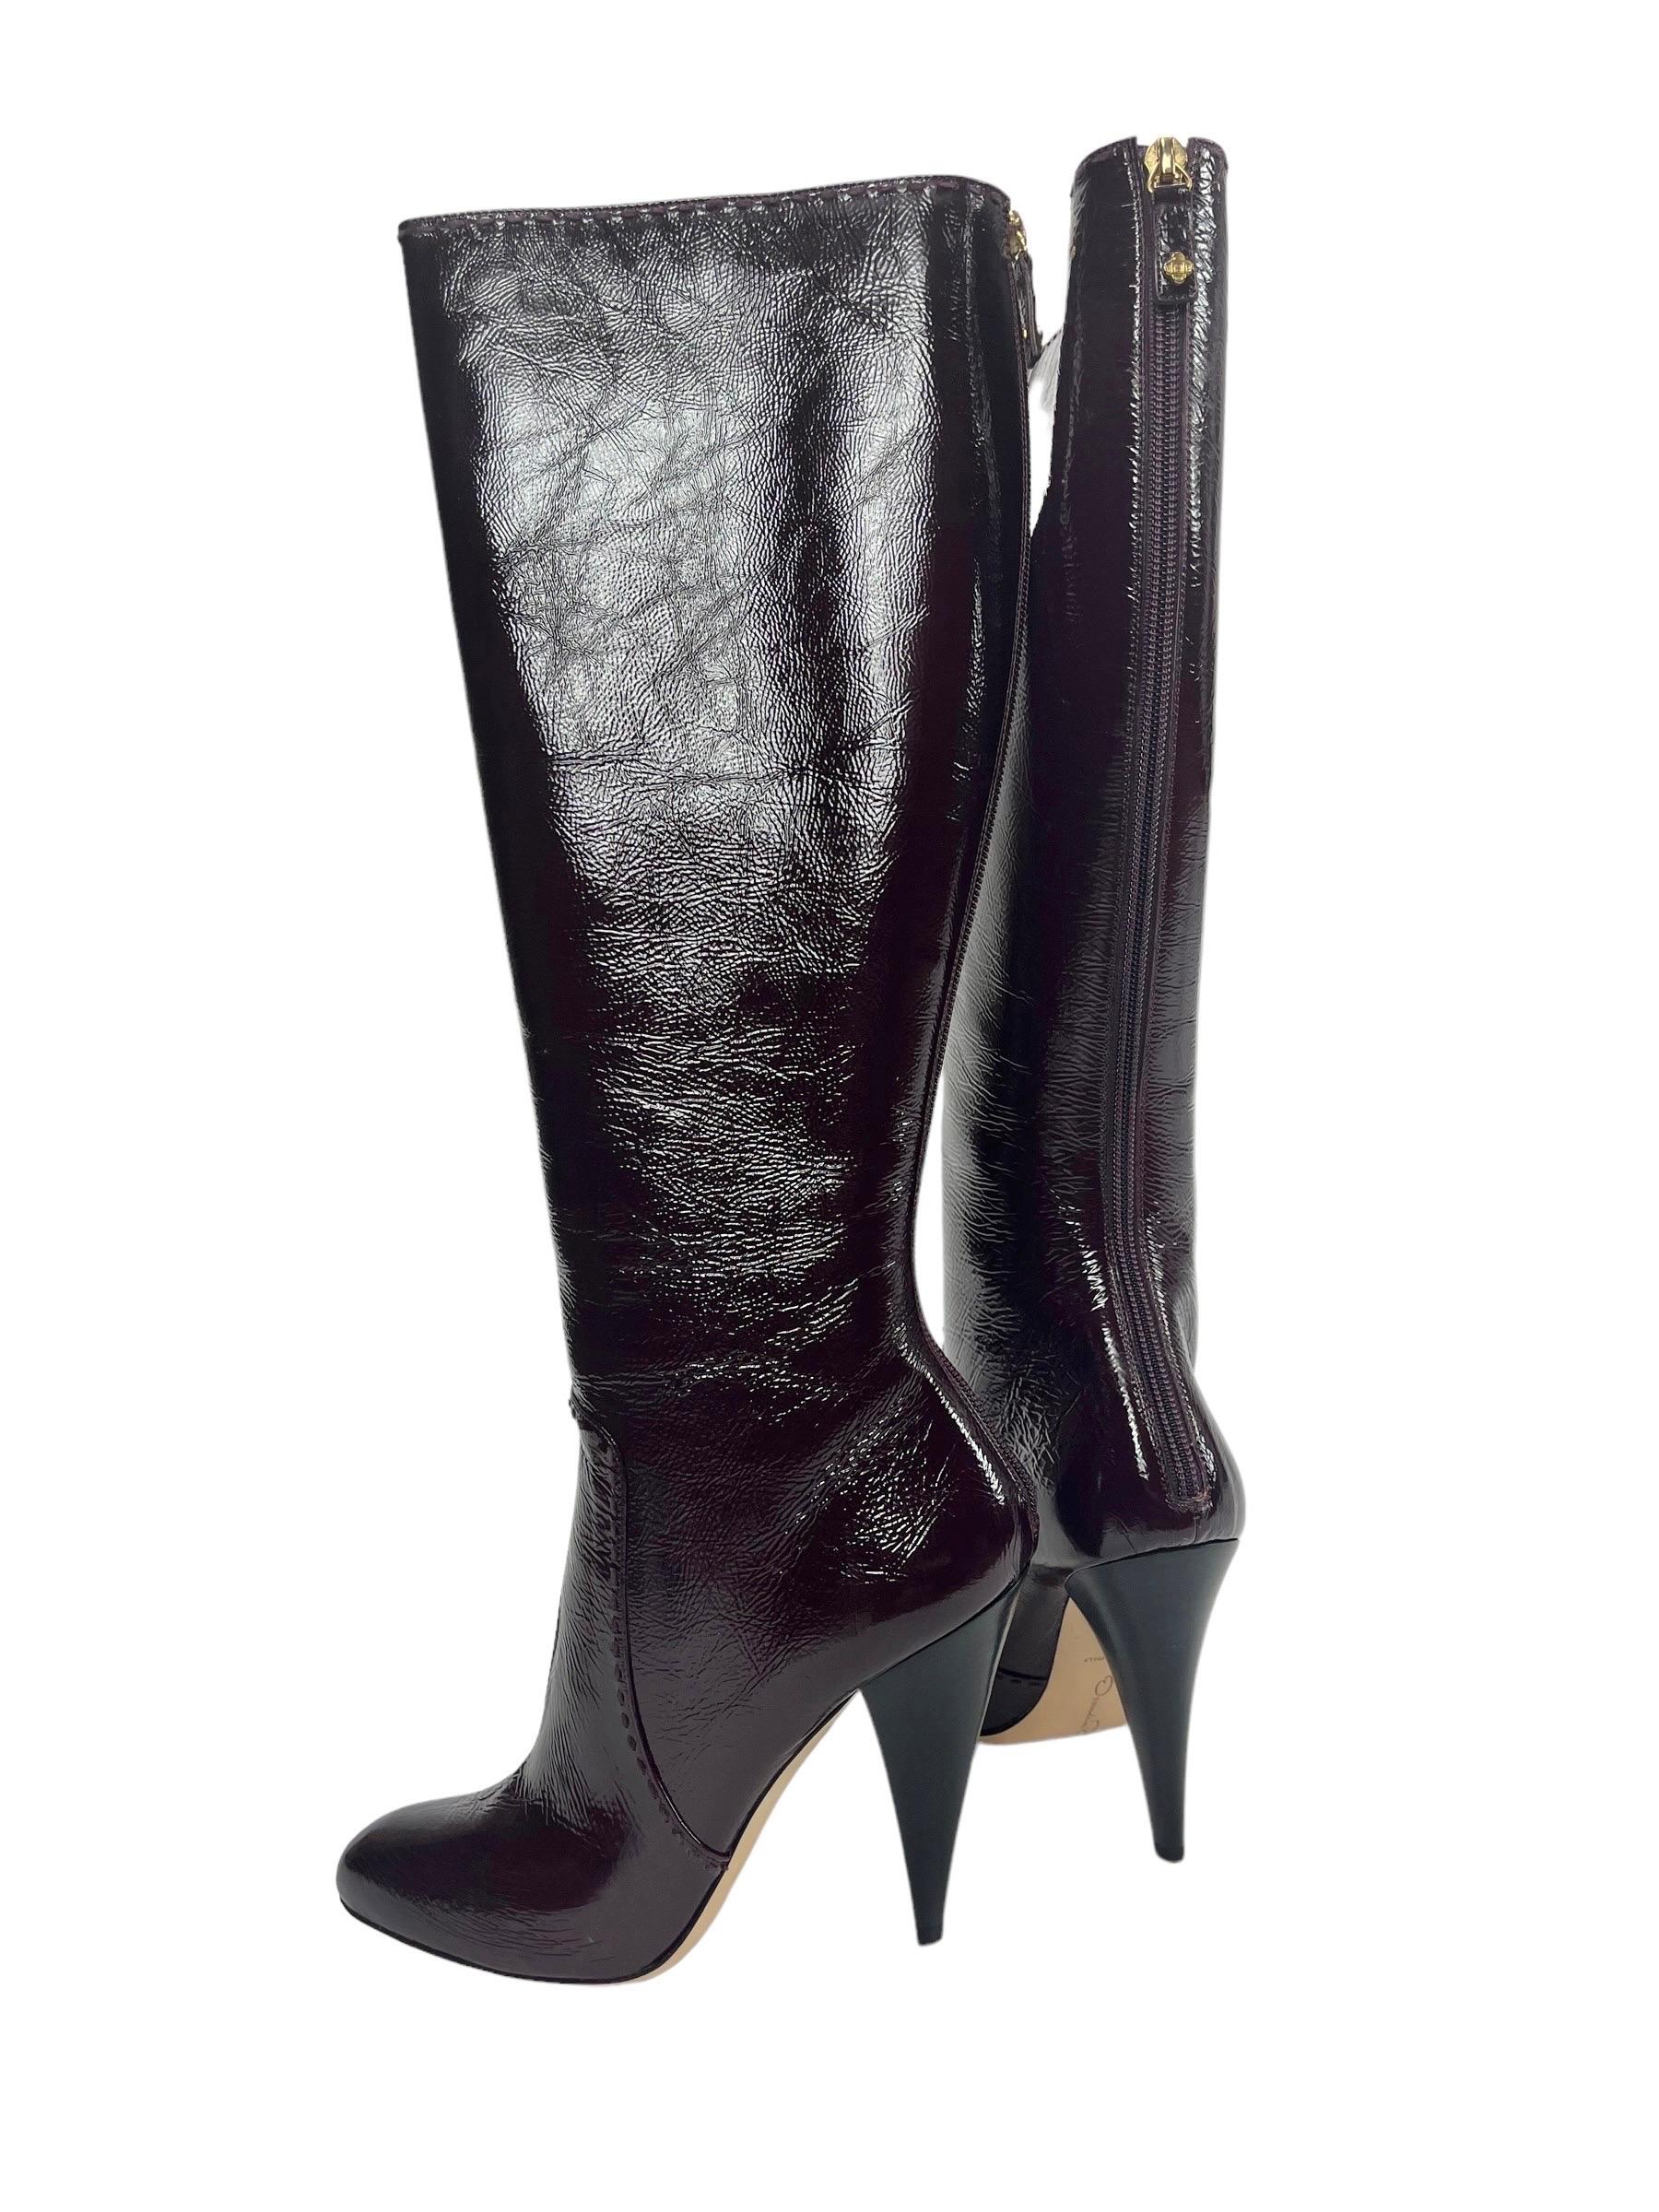 Oscar de la Renta Boots Wine Patent Leather Knee Length Boots 
Italian Sizes Available 38.5 ( US 8.5 ) and 39.5 ( US 9.5 )
100% Leather upper, Back zip for easy on/off, Lining: Smooth 100% leather. 
Heel height: 4.75